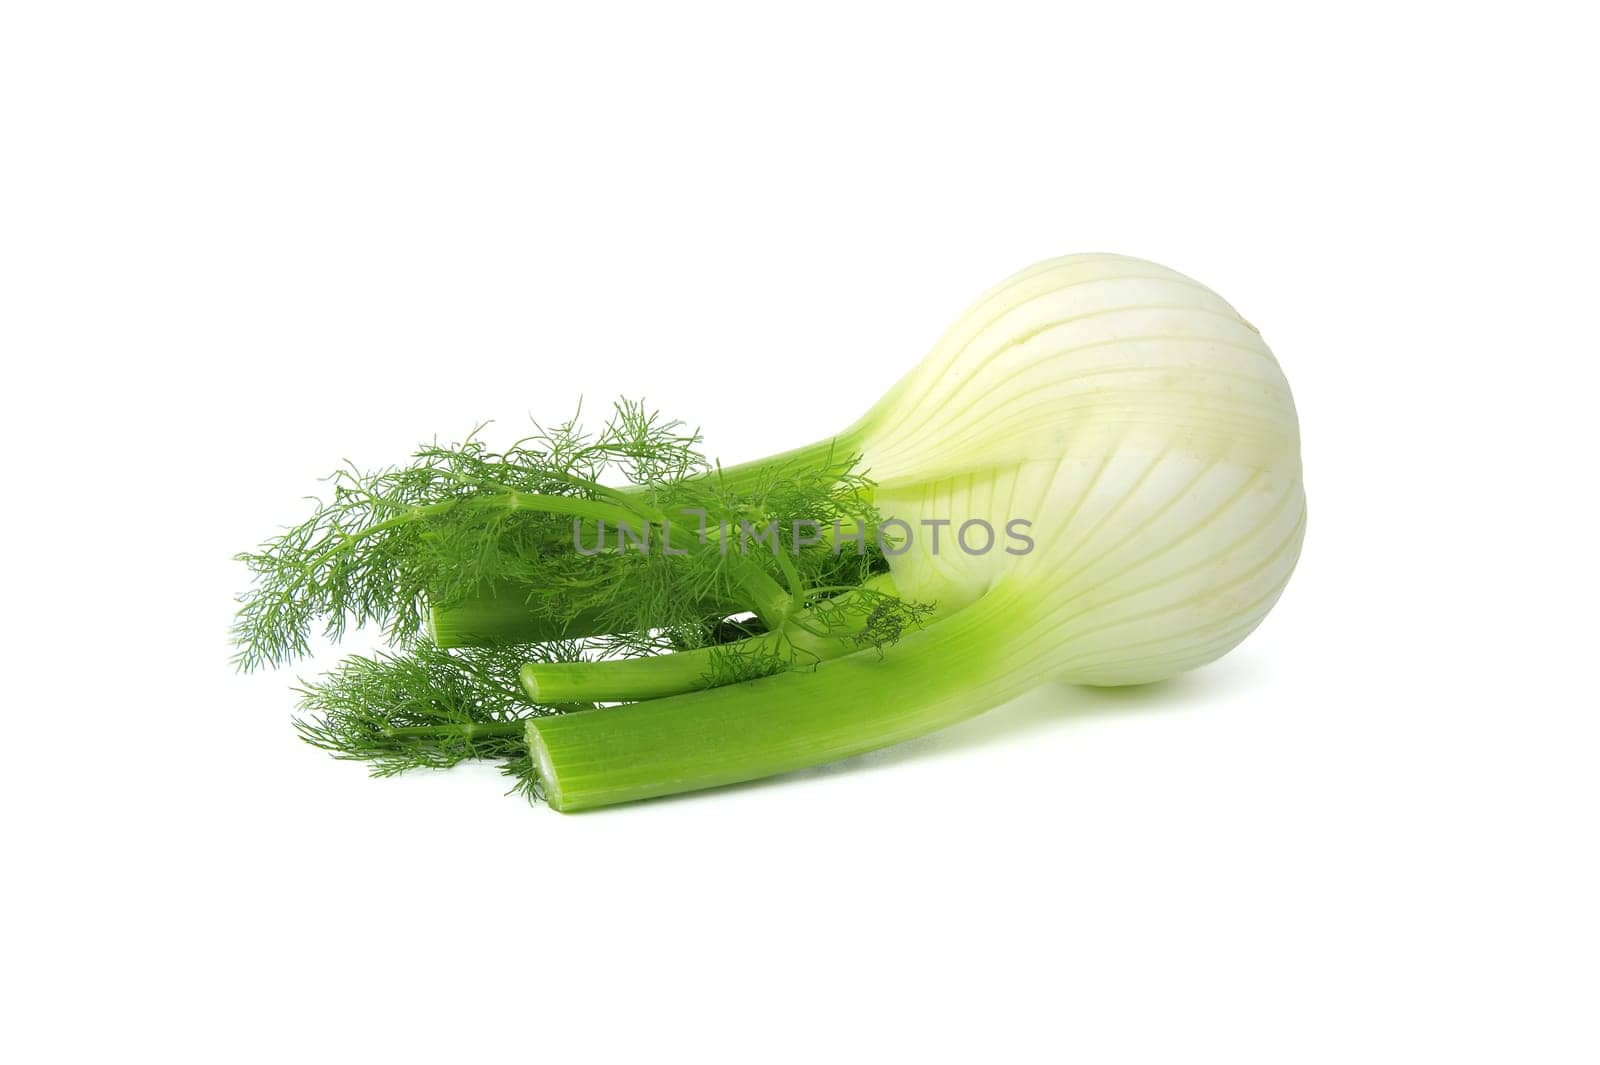 Whole fennel bulb predominantly light yellow, with contrasting shades of green on the stalks and feathery leaves isolated on white background